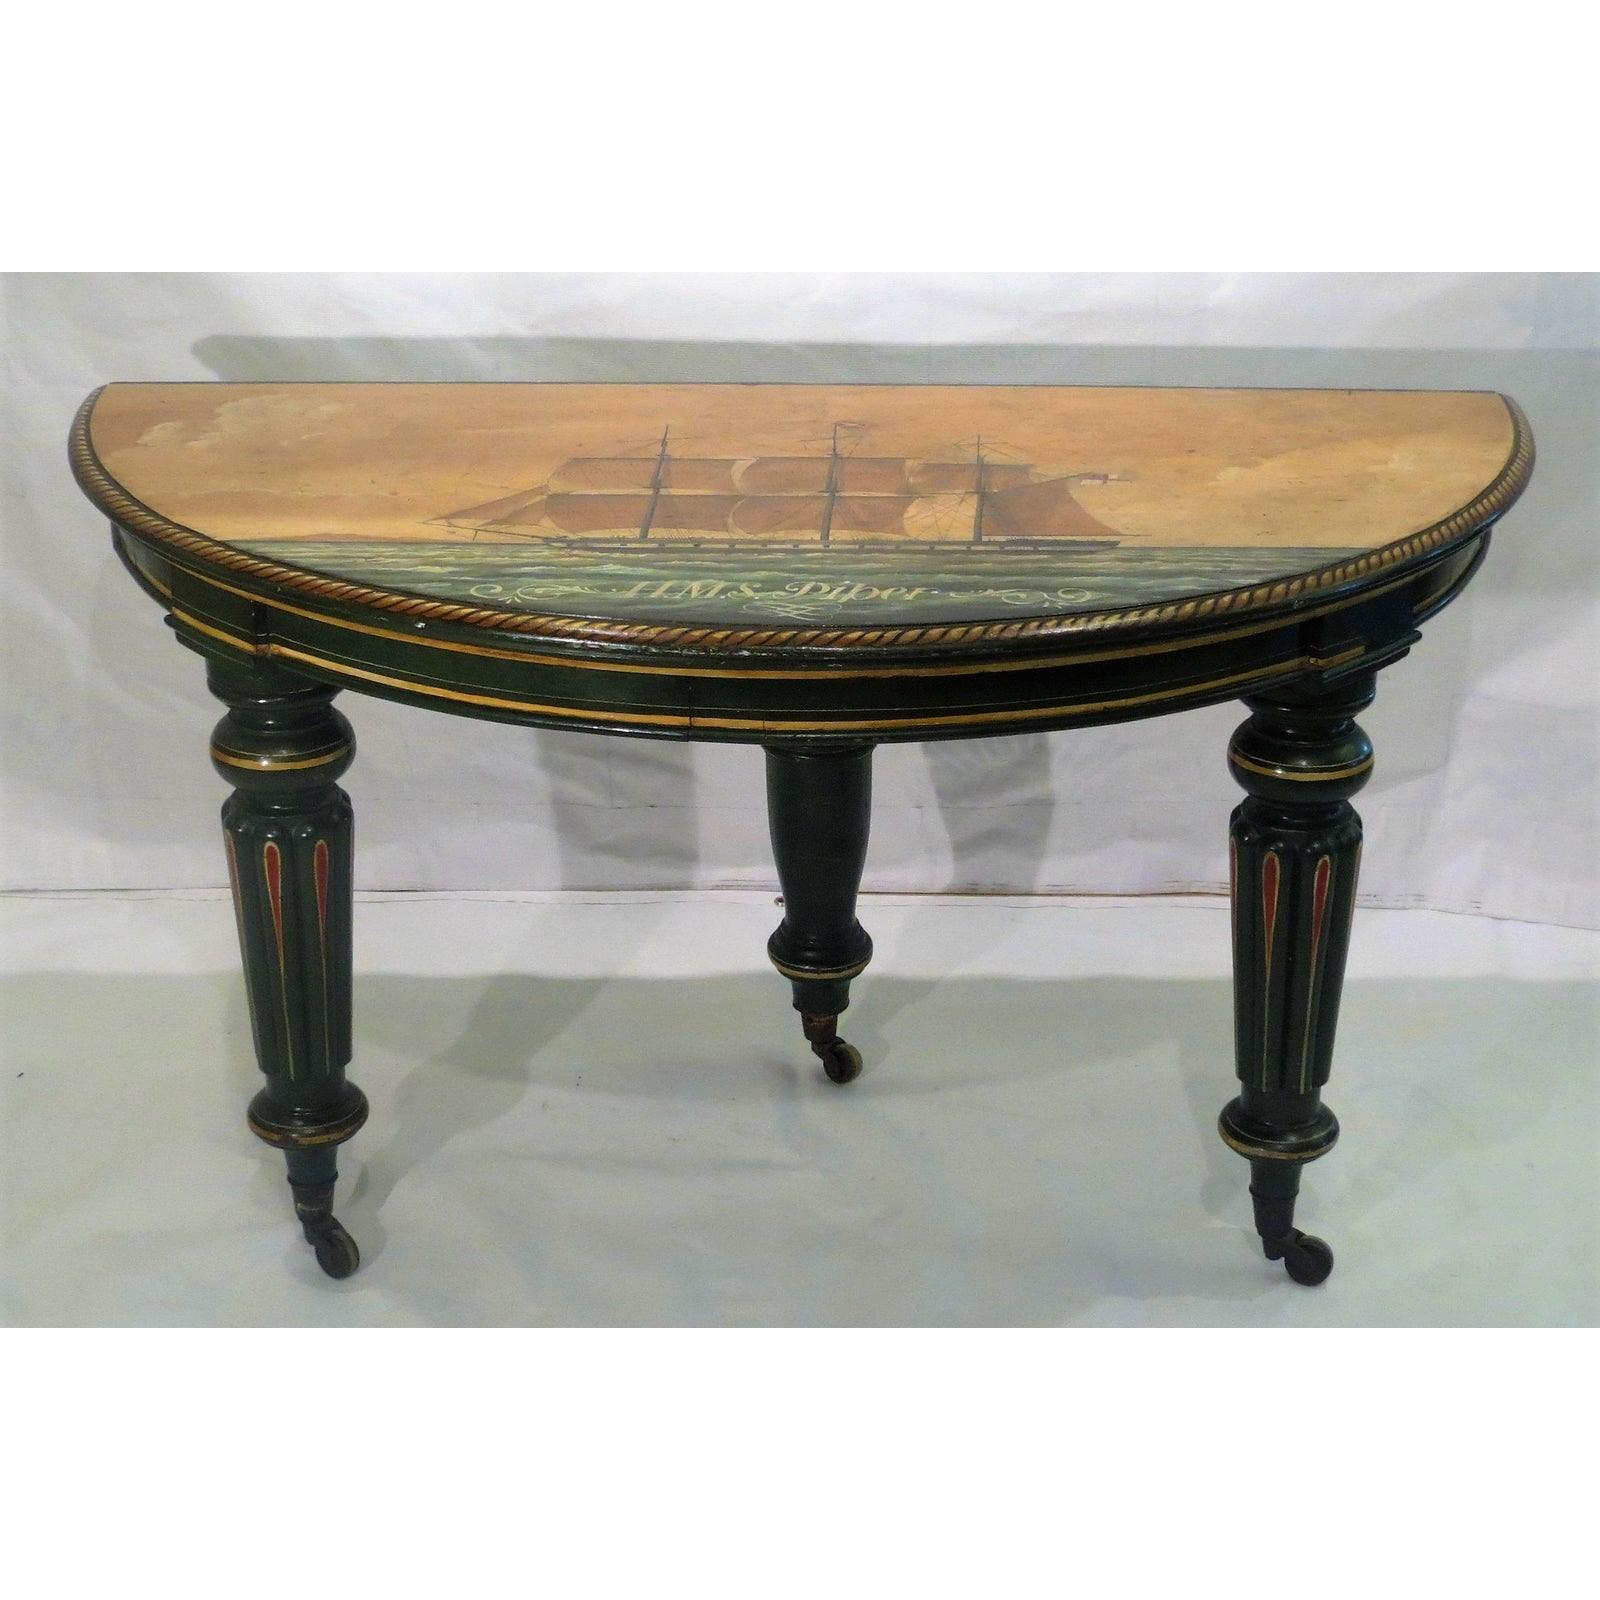 Mahogany Antique Regency Period Breakfast Table with Nautical Ship Paintings